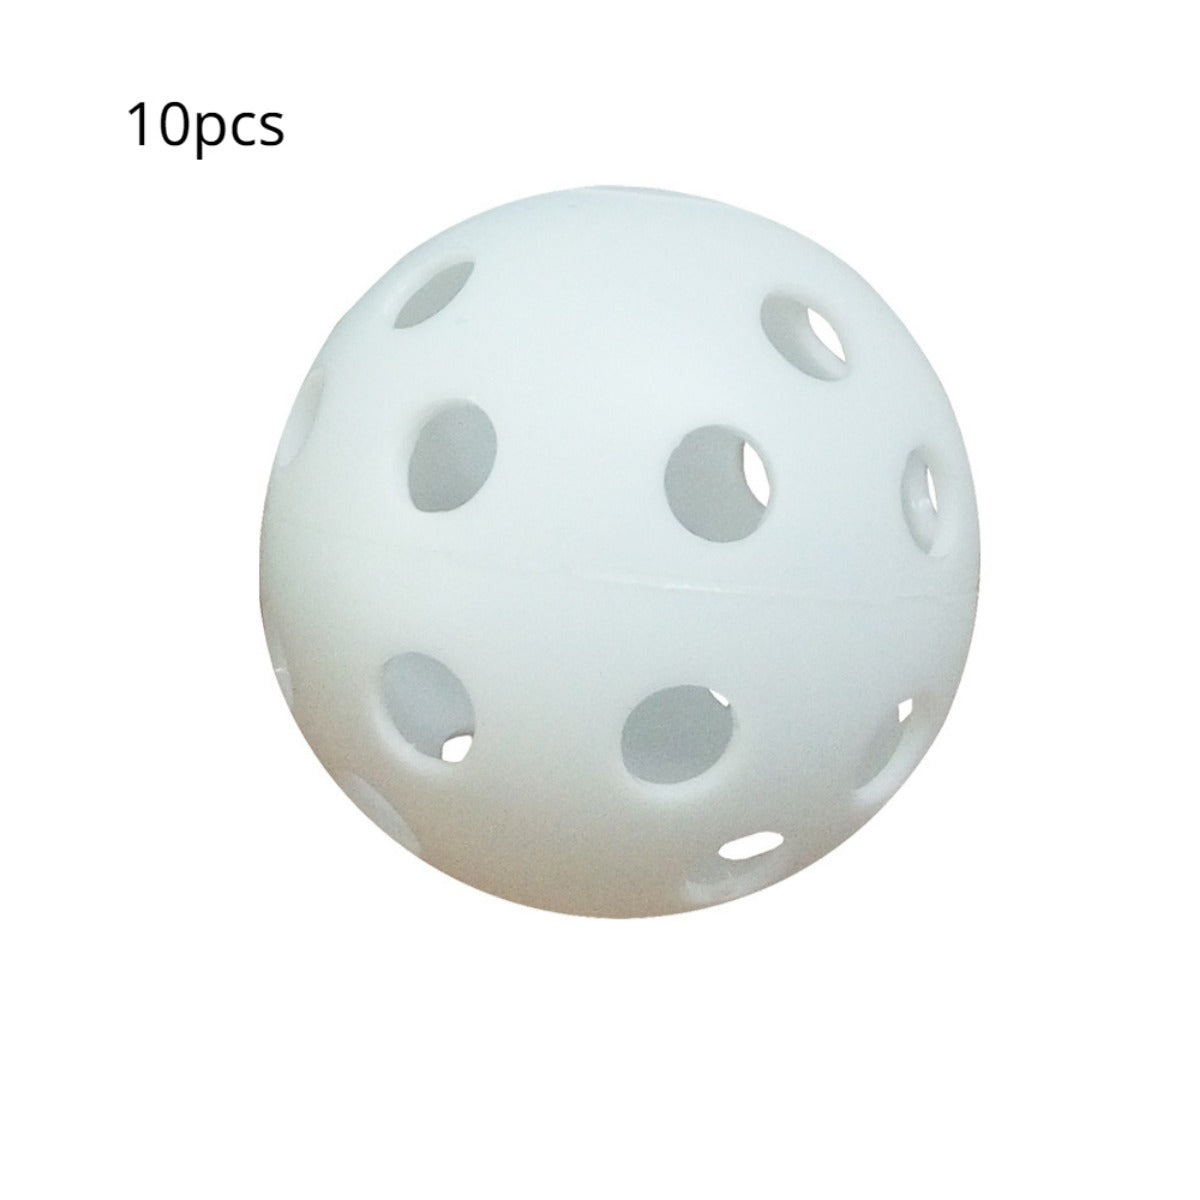 10 Hollow and soft plastic practice balls